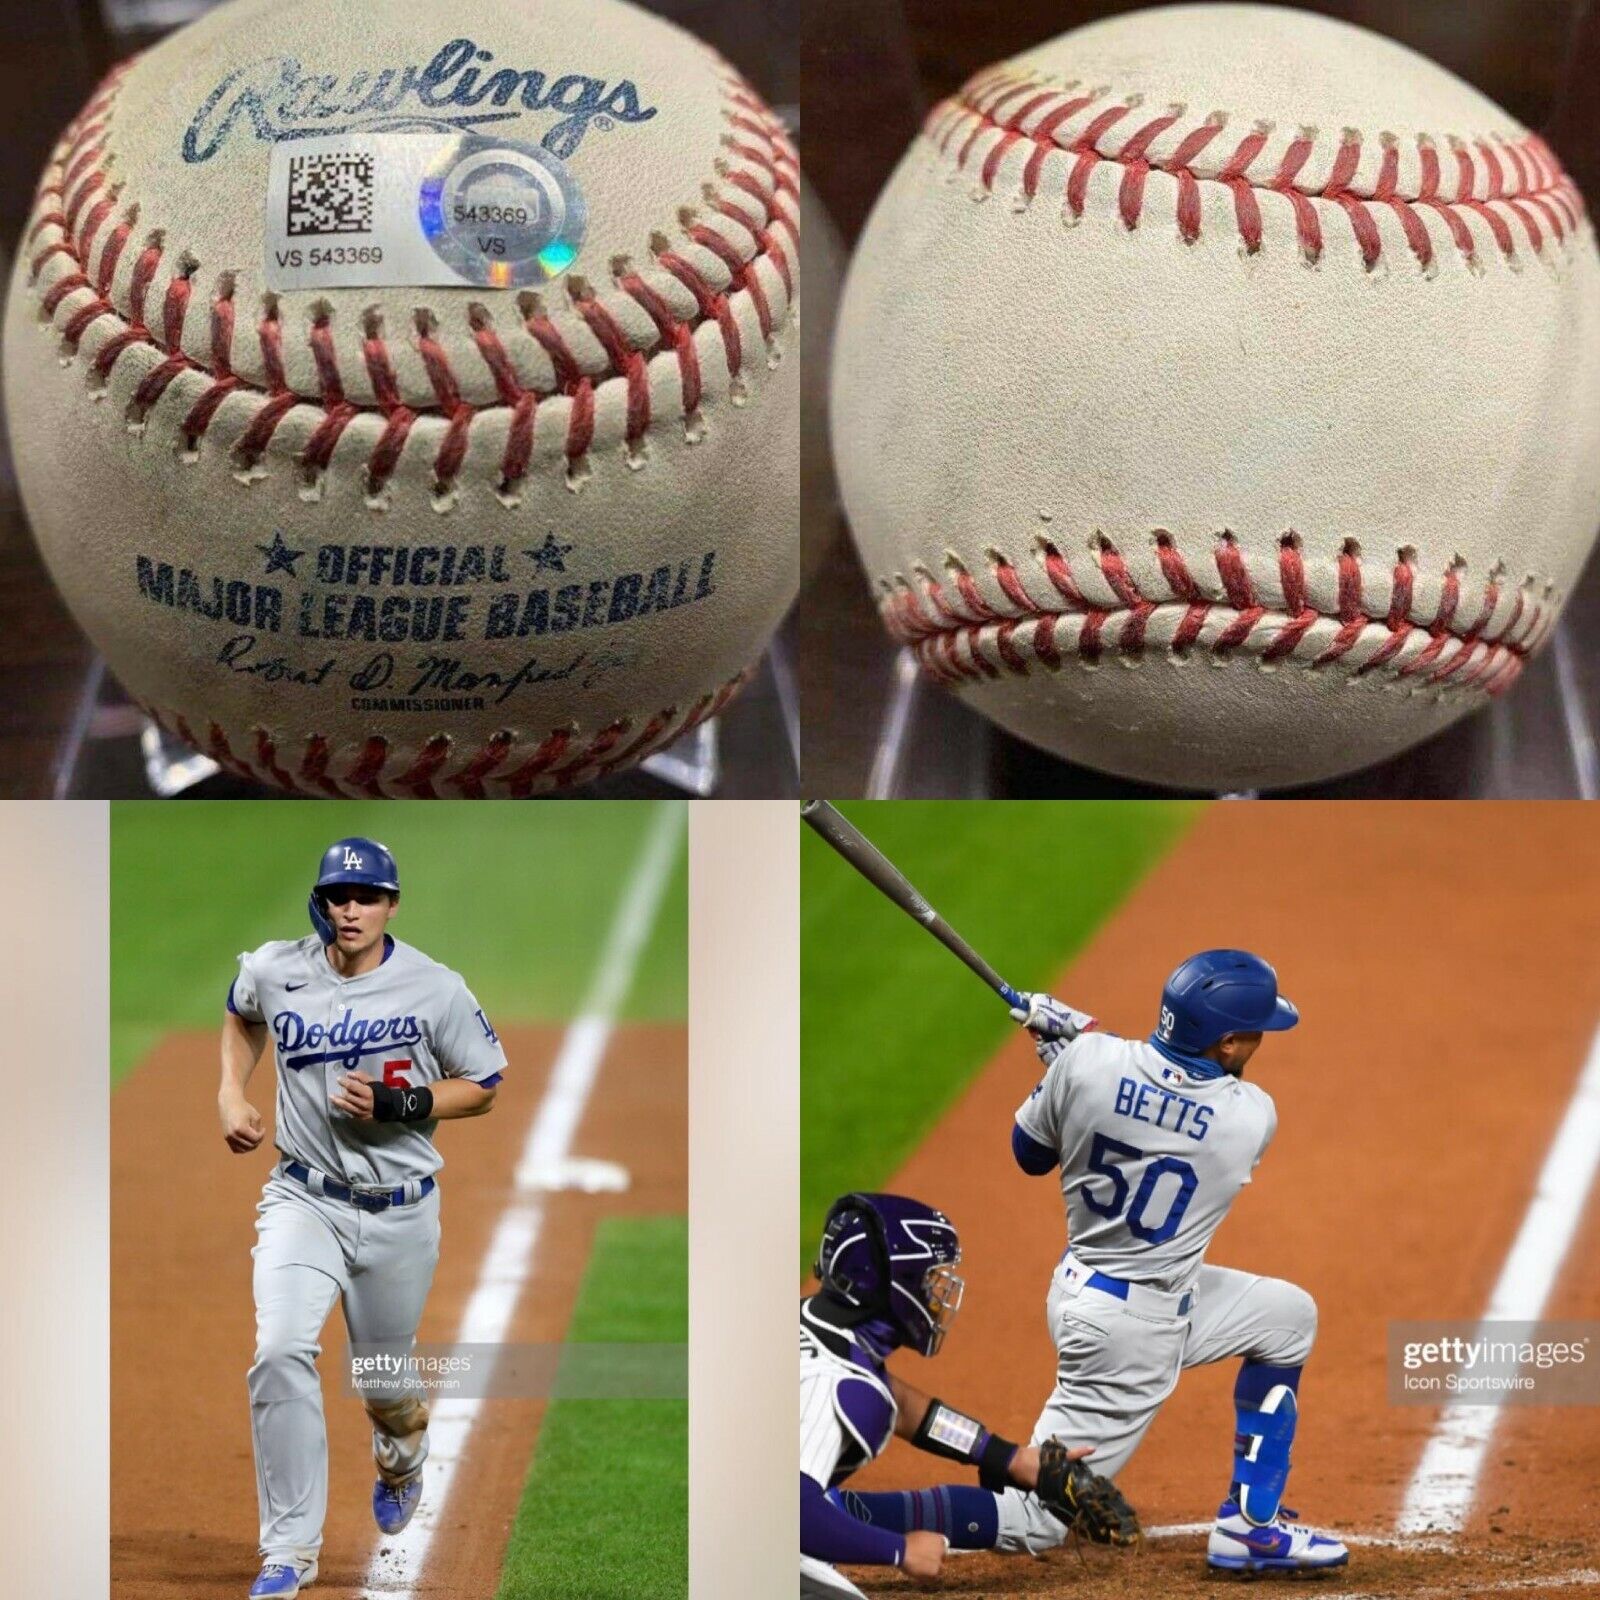 9/17/20 DODGERS GAME USED BASEBALL - MOOKIE BETTS SINGLE & COREY SEAGER DOUBLE 